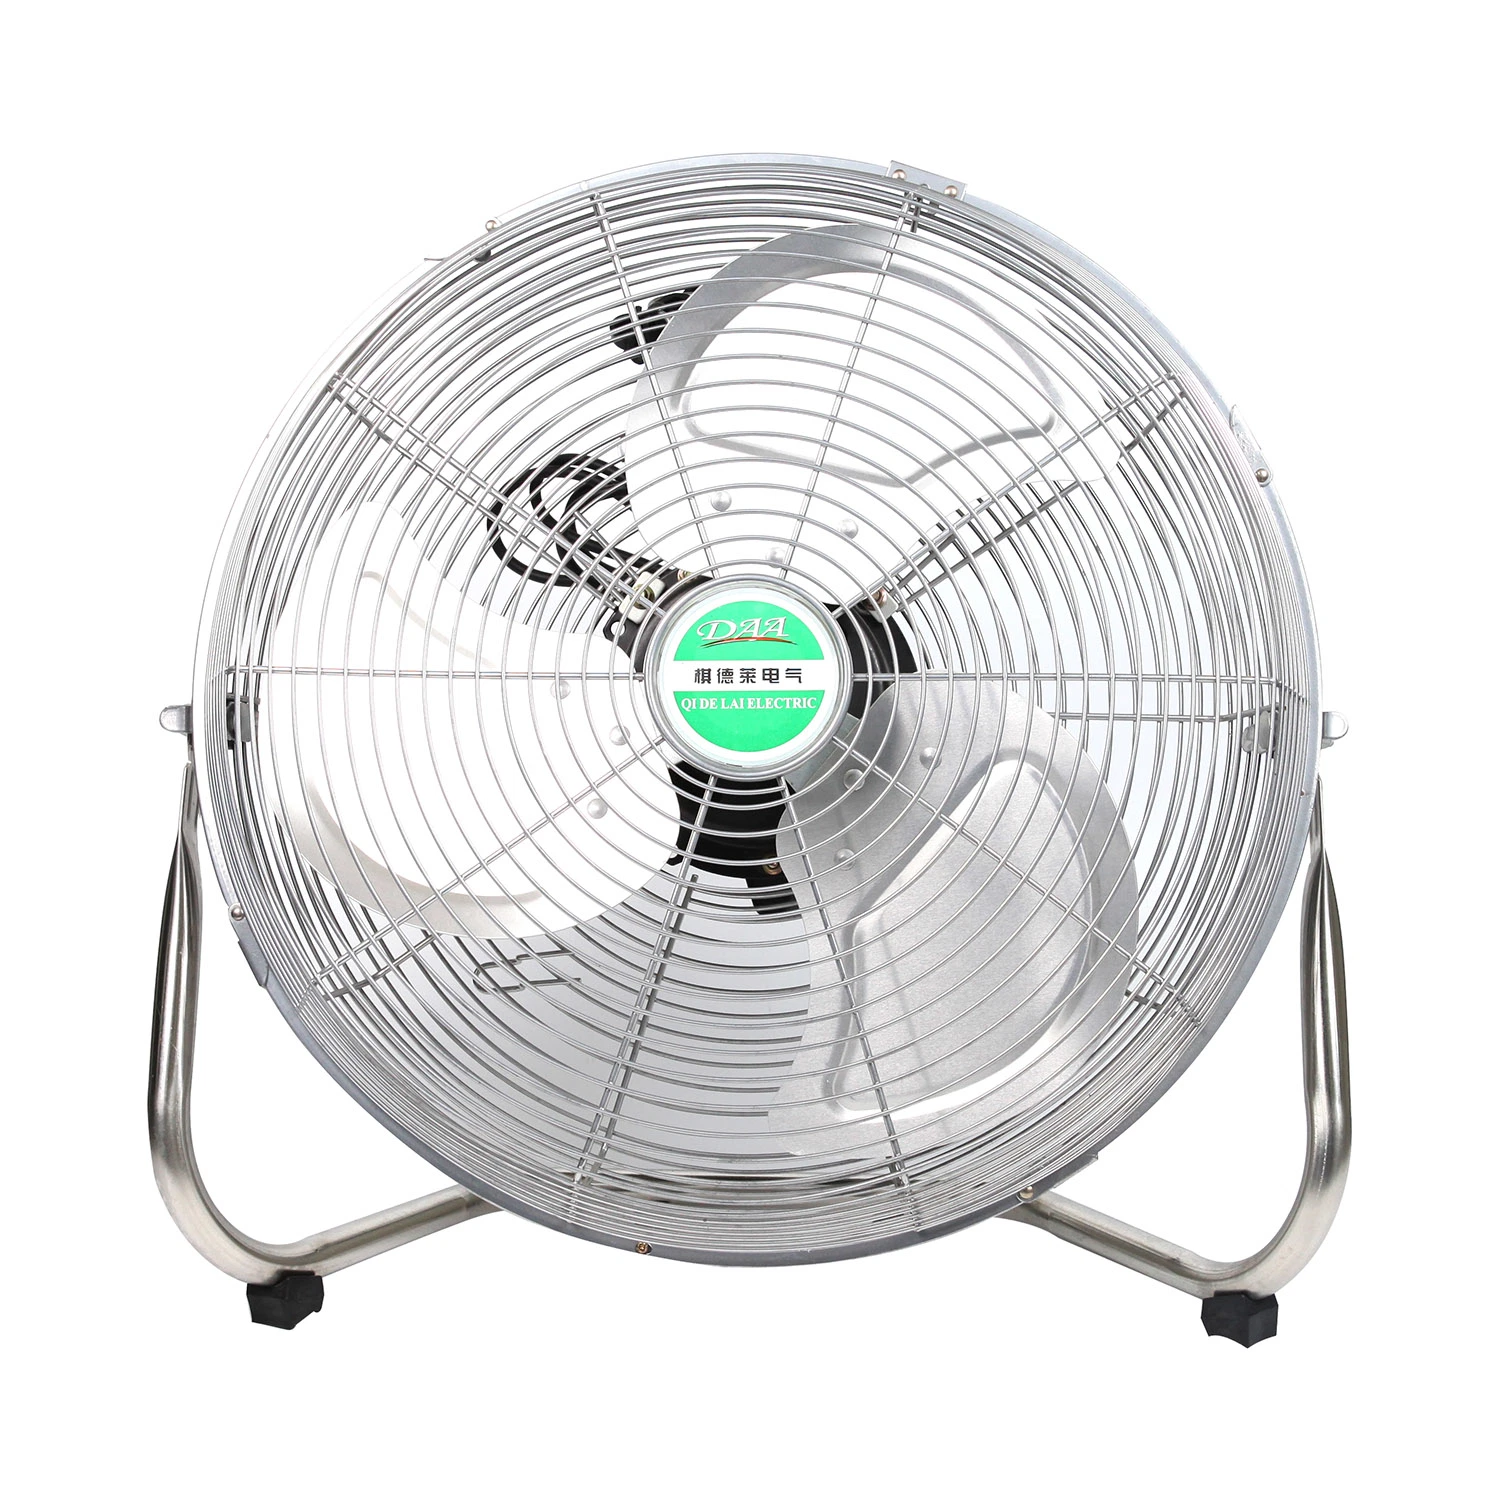 Pedestal Electrical Electric Stand Fan Flooring Fan for Room Air Cooling